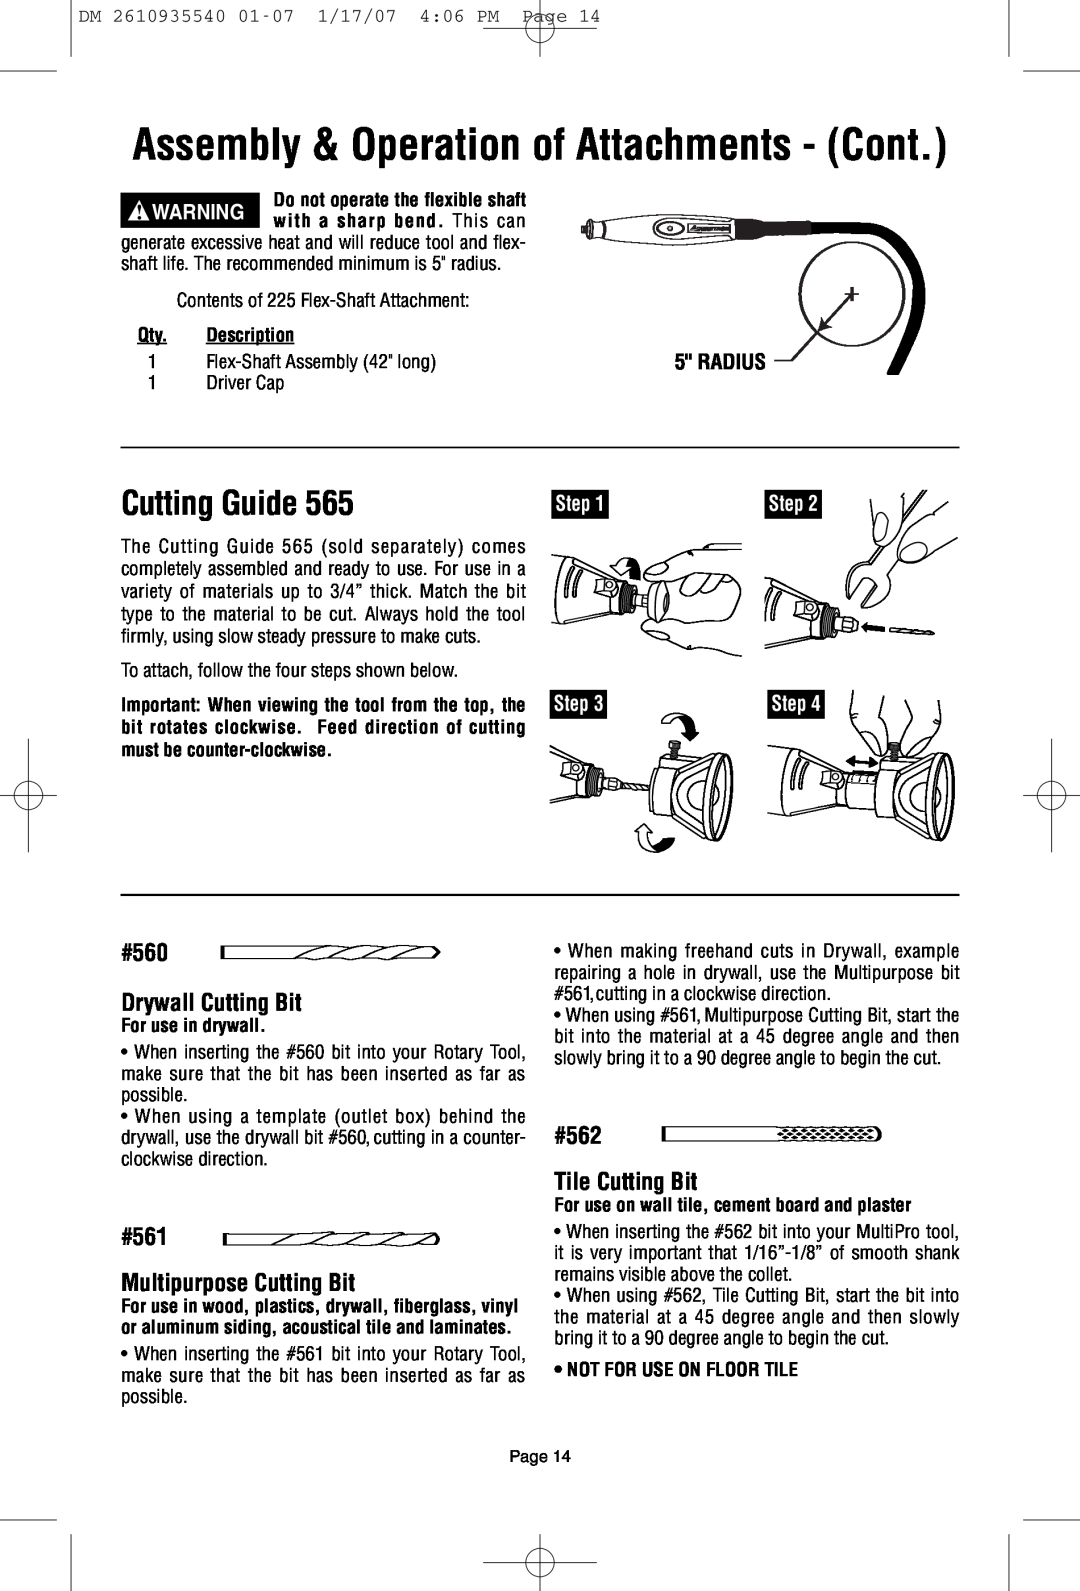 Dremel F013039519 owner manual Assembly & Operation of Attachments - Cont, #560 Drywall Cutting Bit, #562, Tile Cutting Bit 